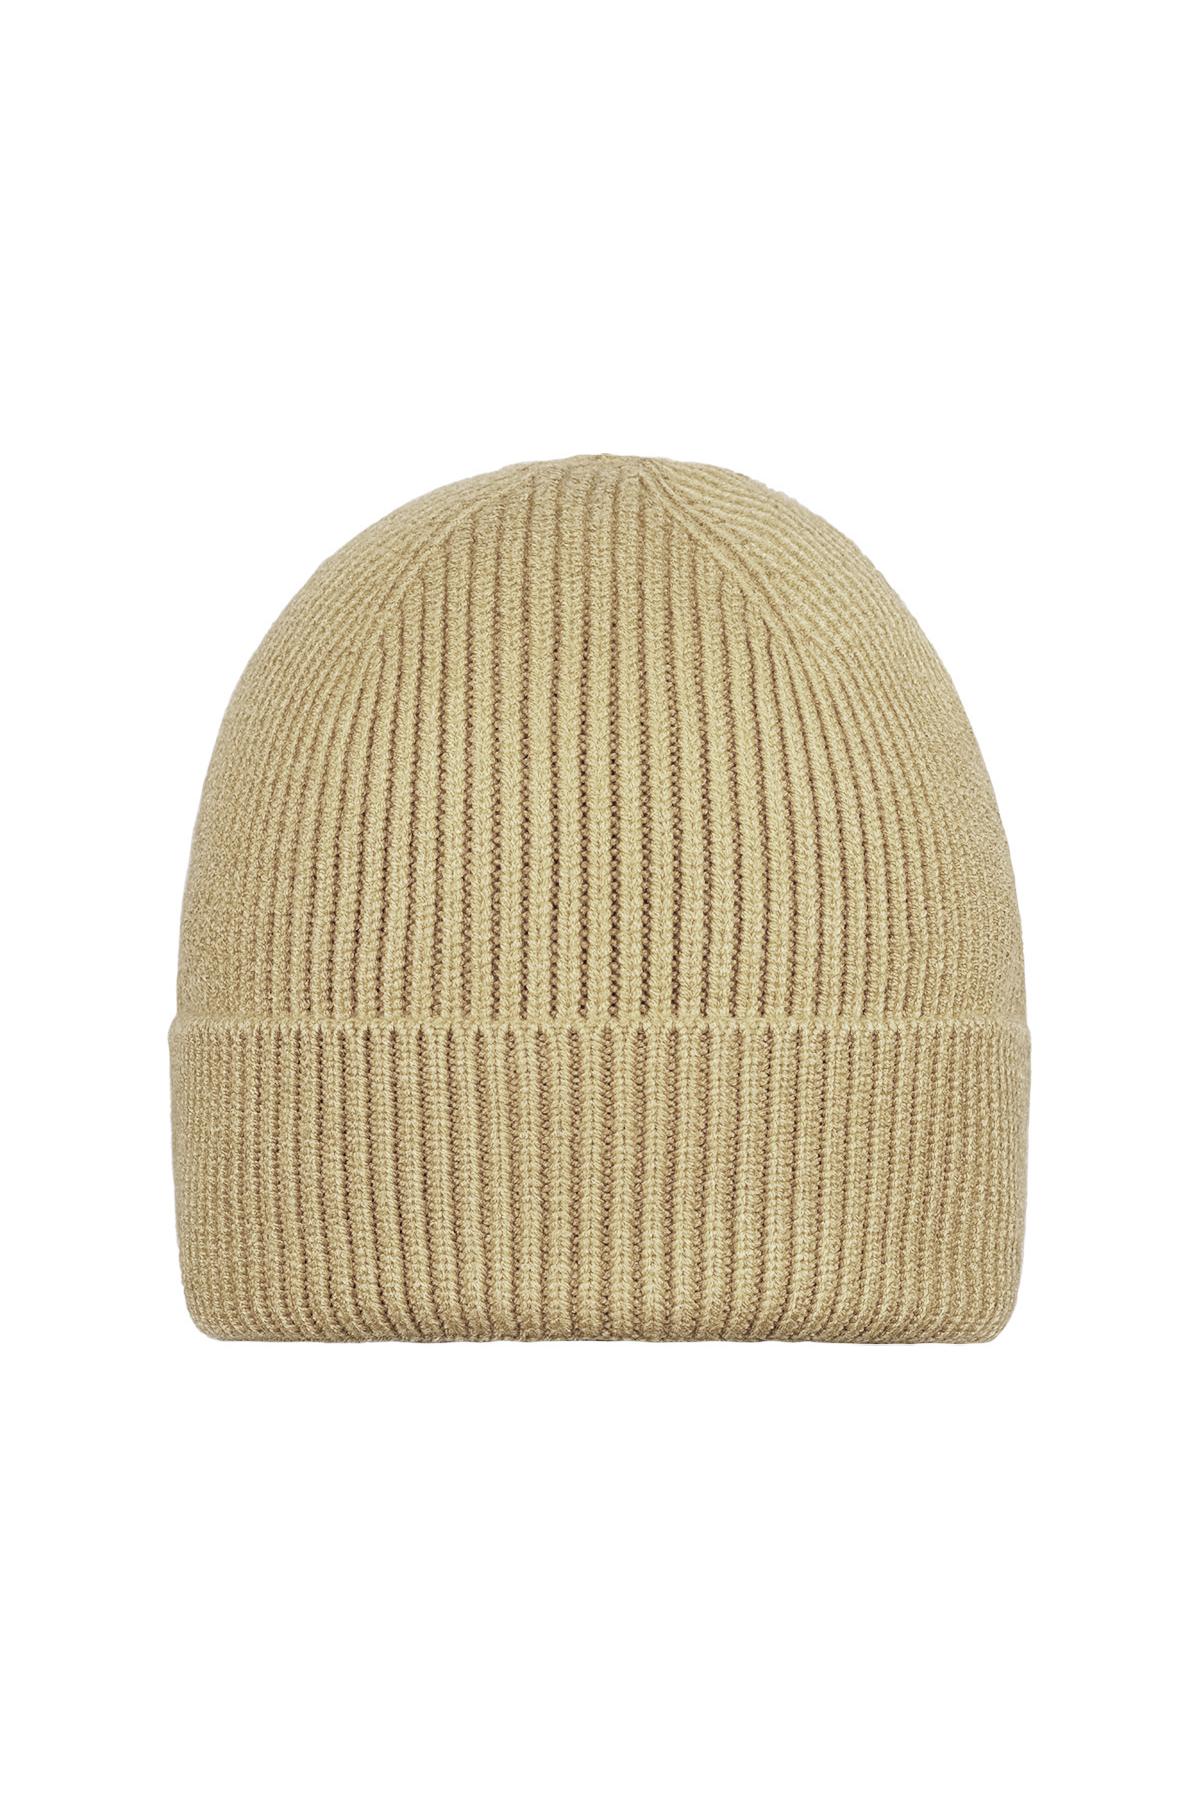 Winter hat sand color Acrylic